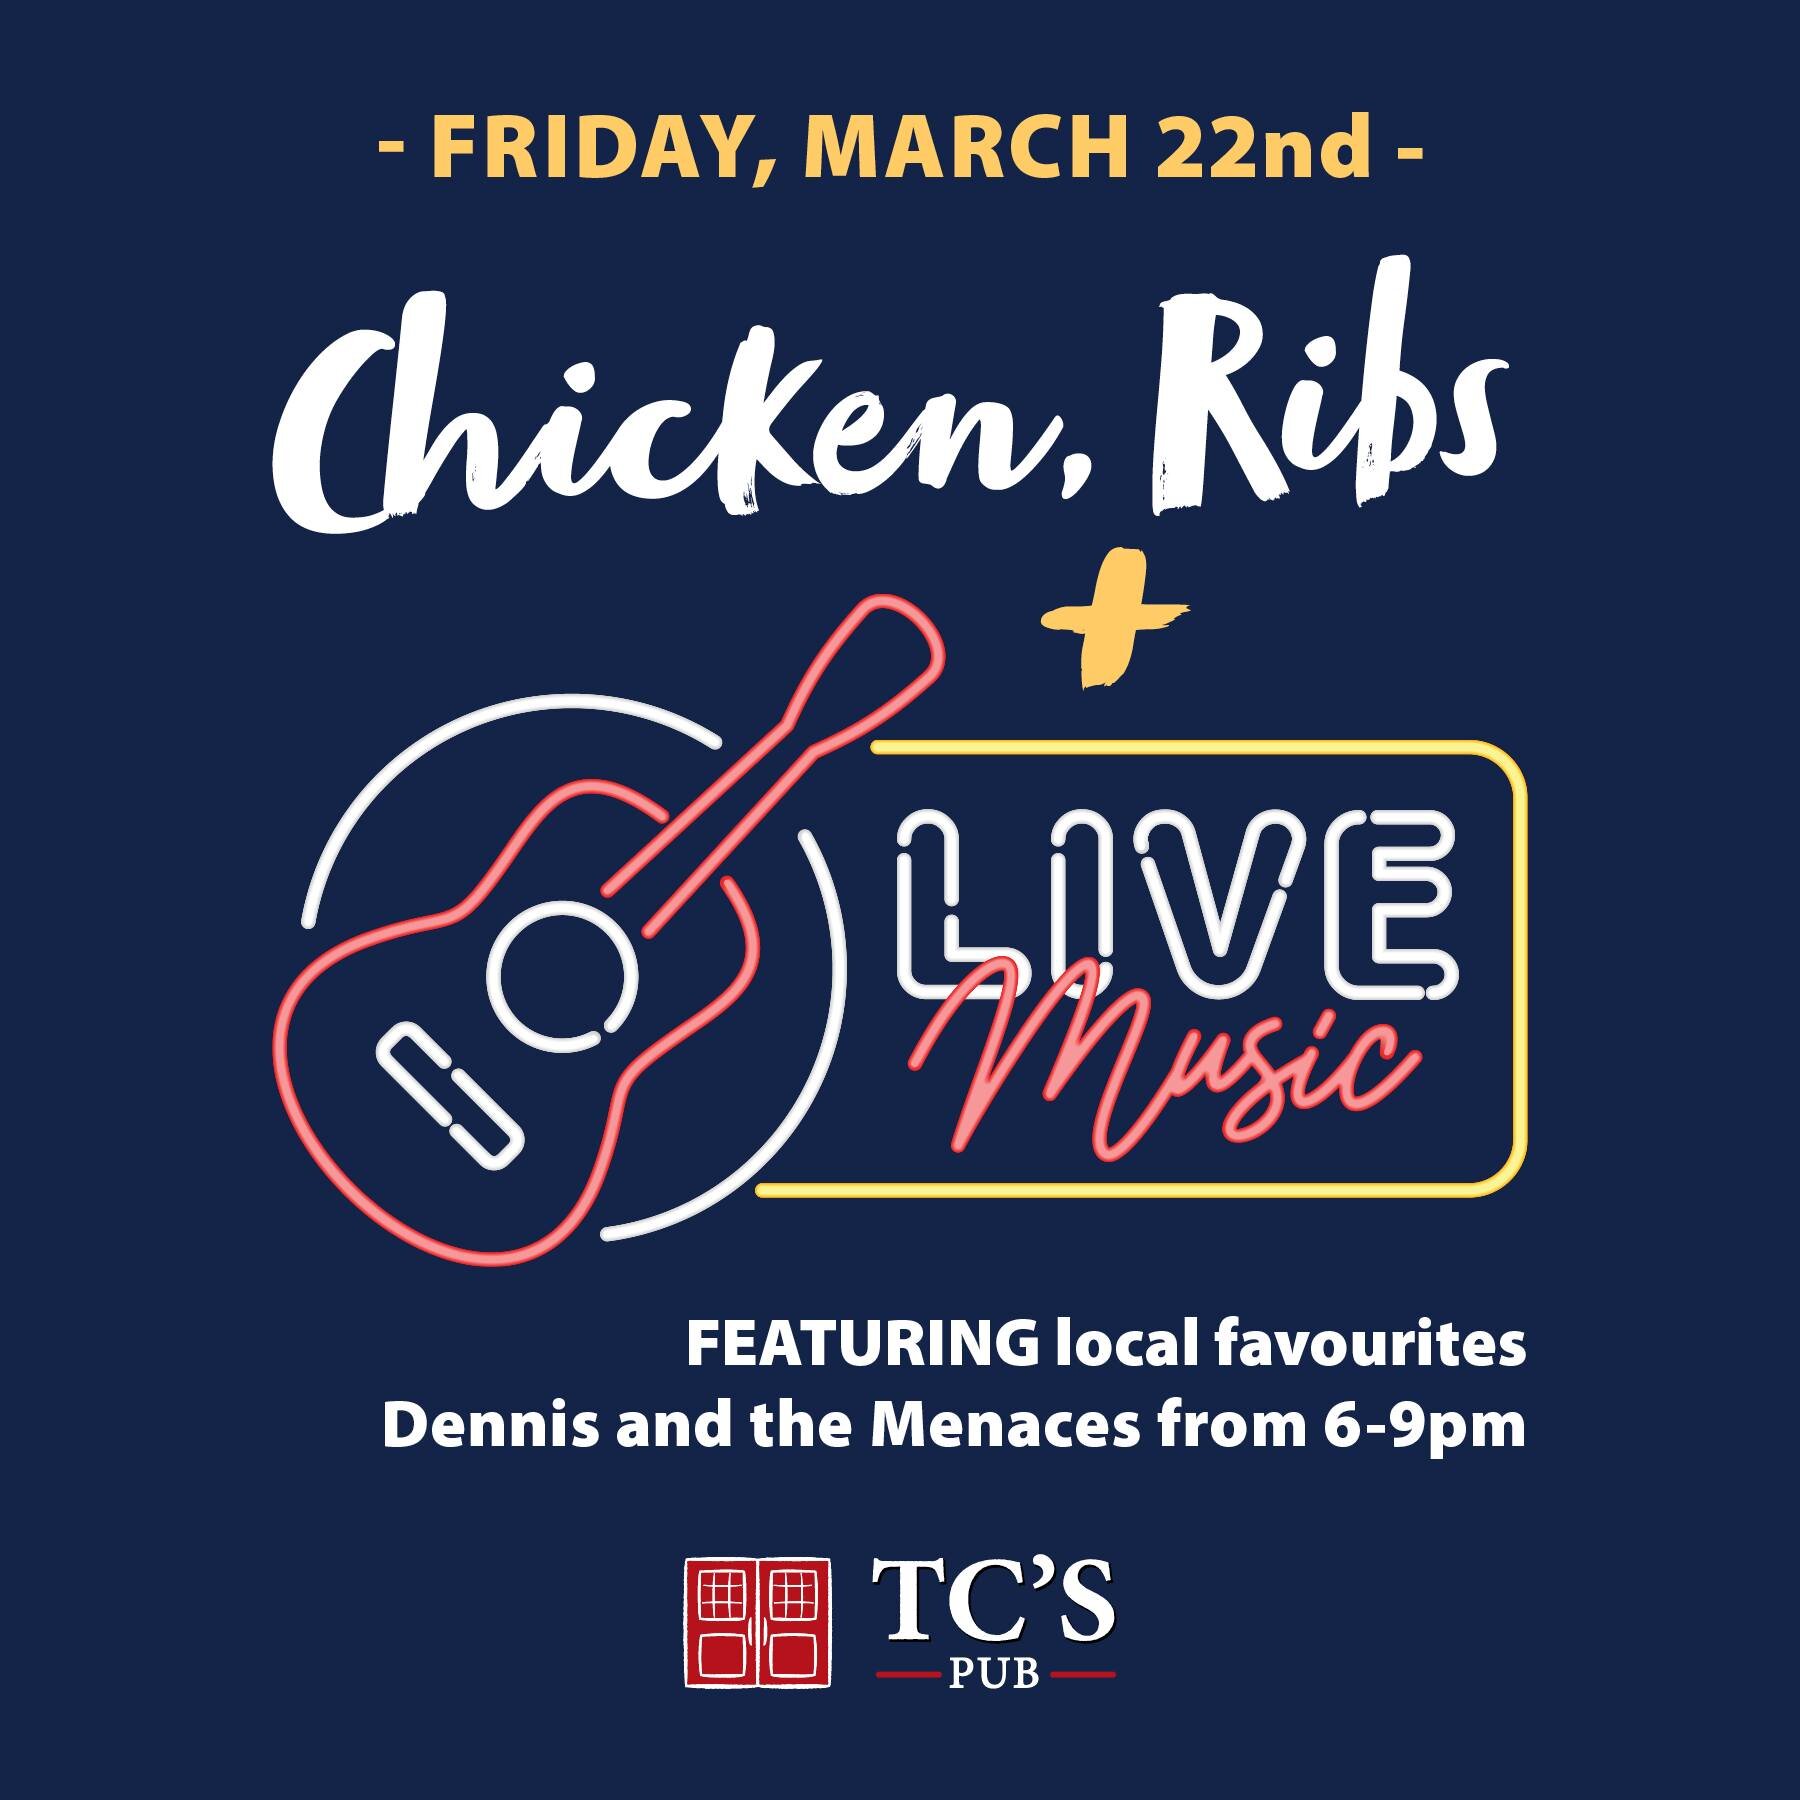 Local favourites Dennis and the Menaces will be performing LIVE at TC's Pub on Friday, March 22nd from 6-9pm! 
.
We'll also have a special dinner feature of BBQ ribs + chicken, served with our all-you-can-eat salad bar for only $25.95 per person. 
.
